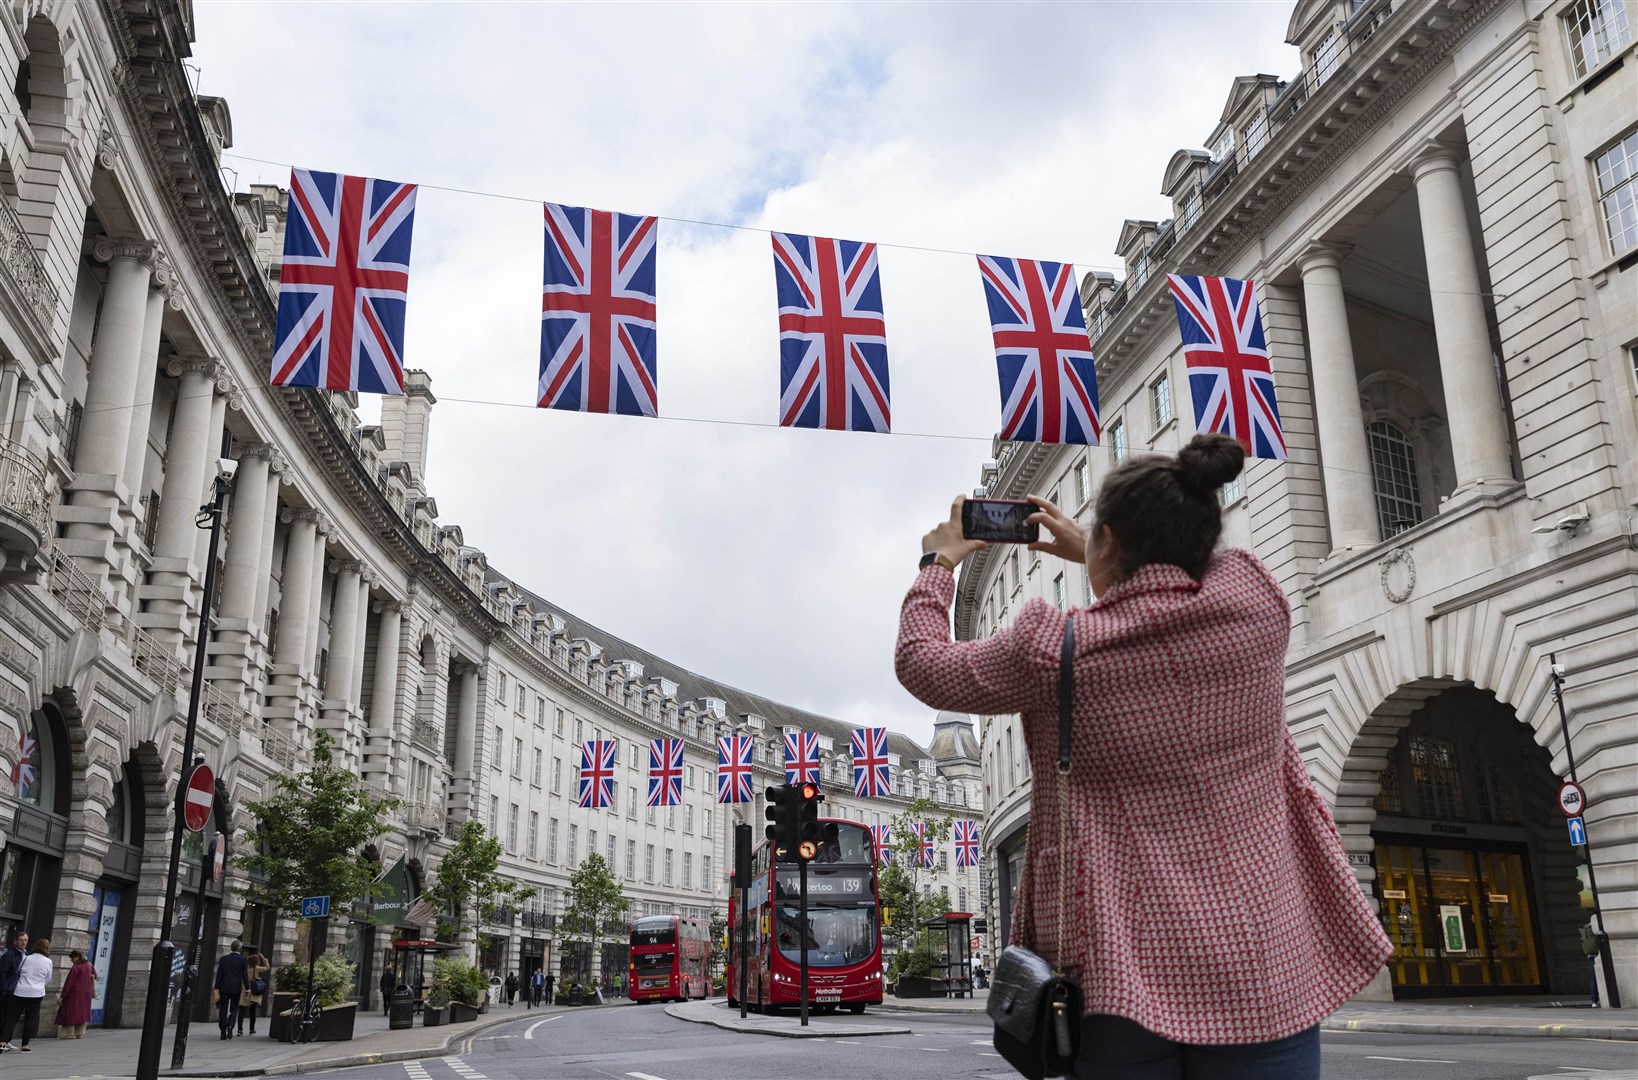 Celebrations will be taking place across the UK to mark the Queen’s reign this week (Matt Alexander/PA)